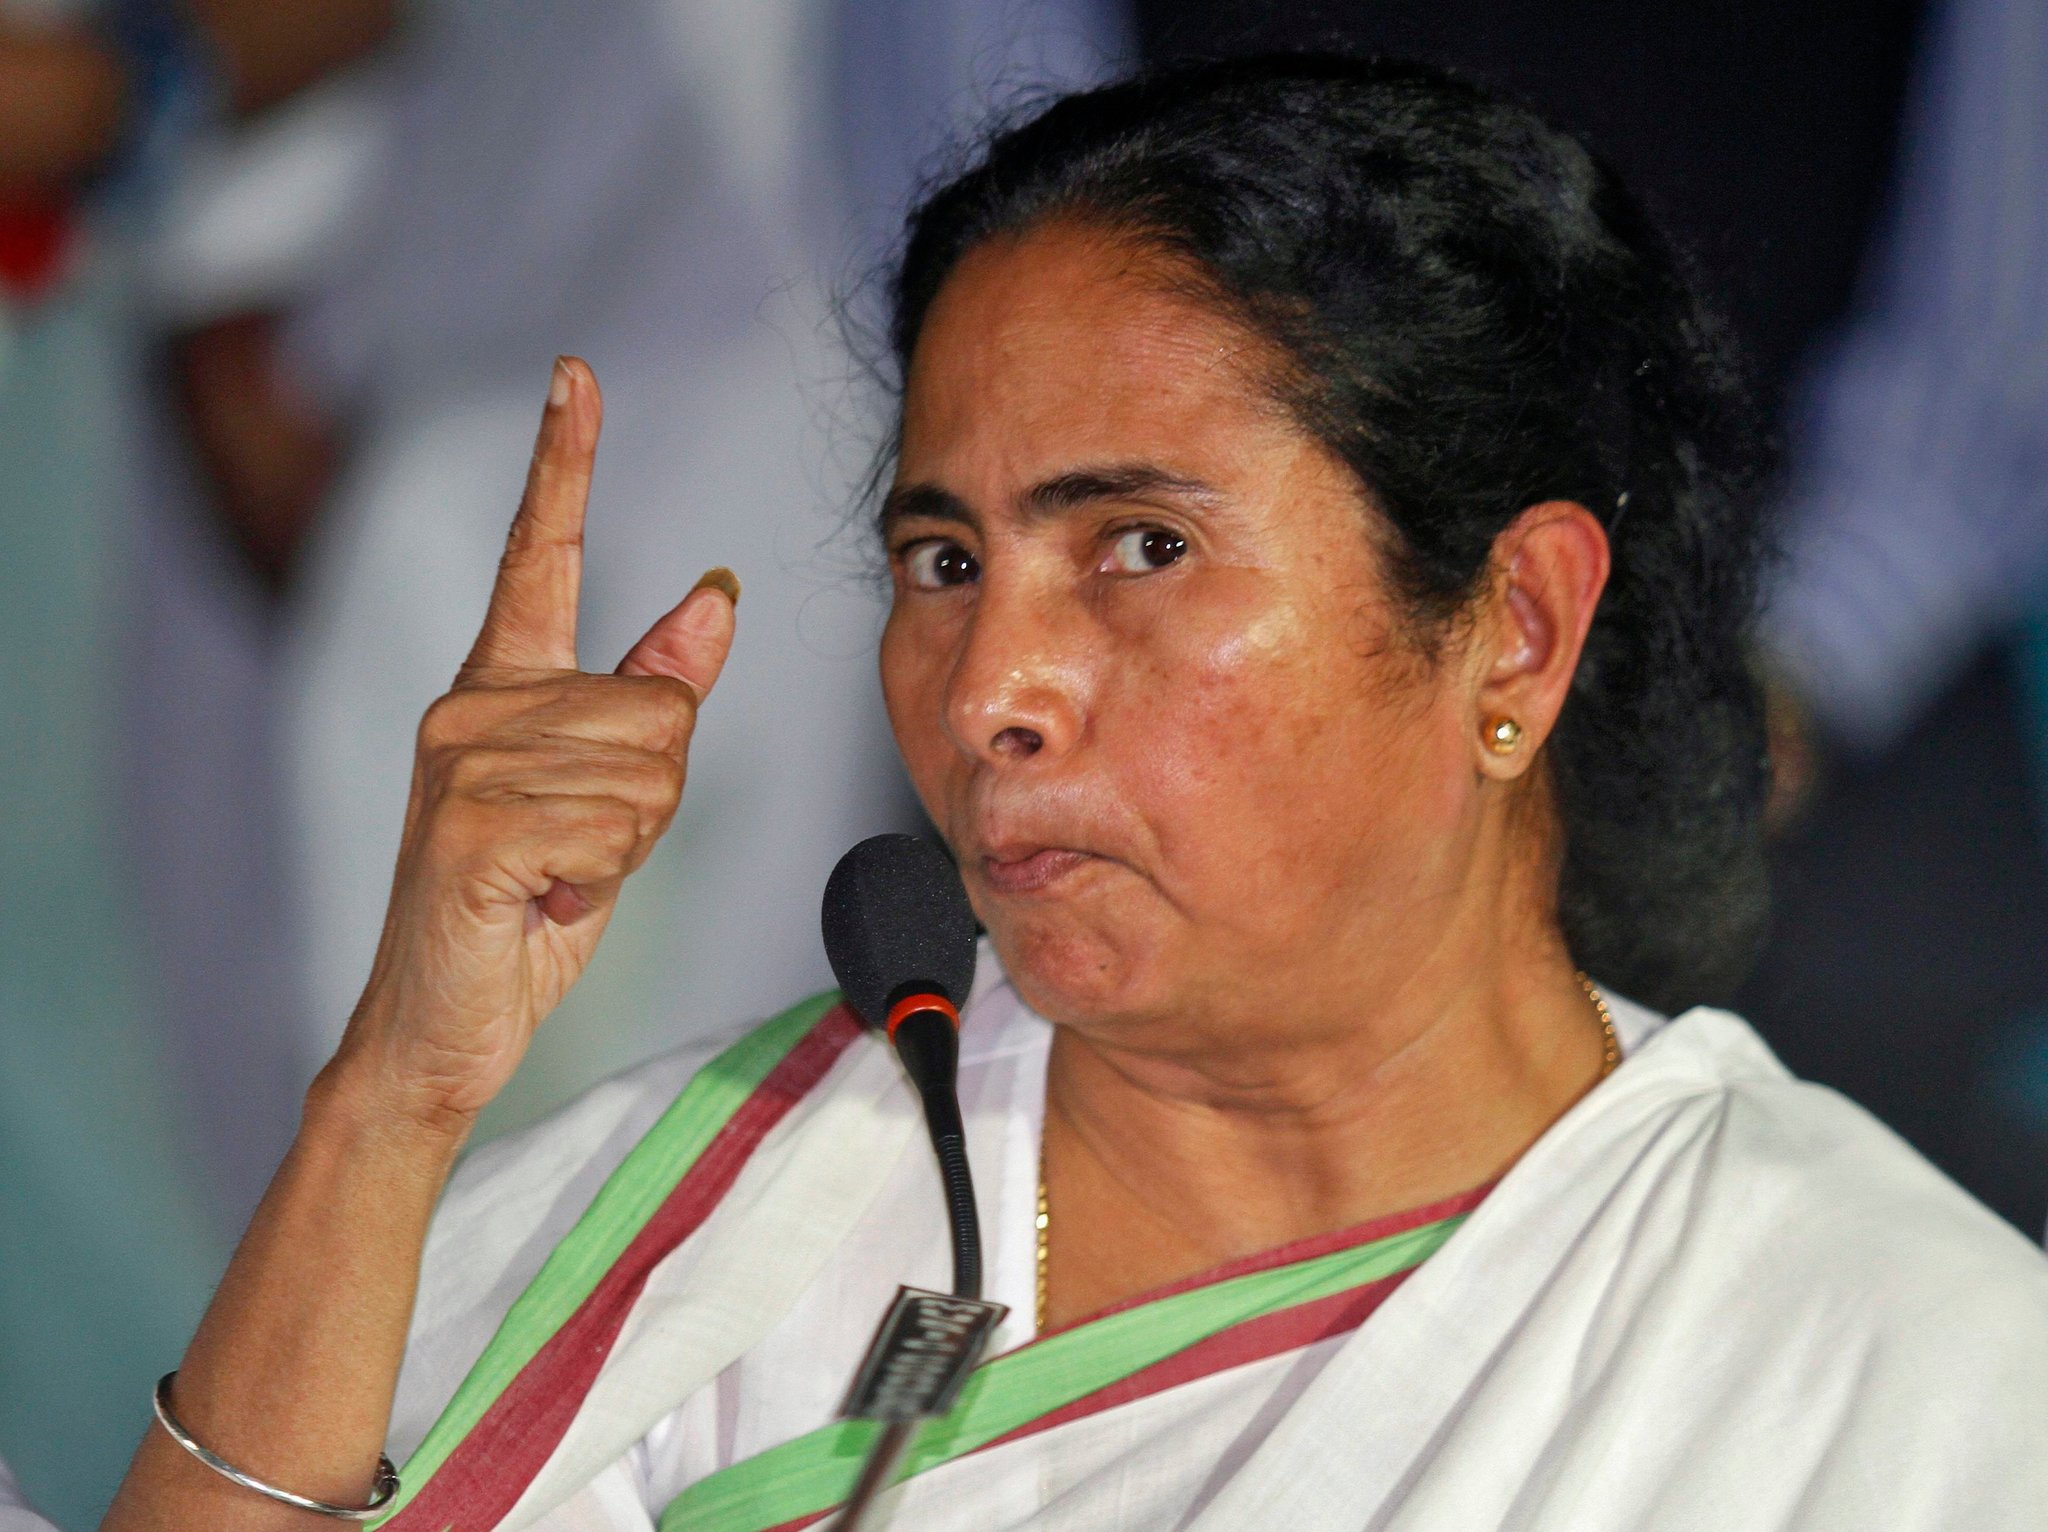 Mamata says murder conspiracy after explosives found at rally venue 2.jpg